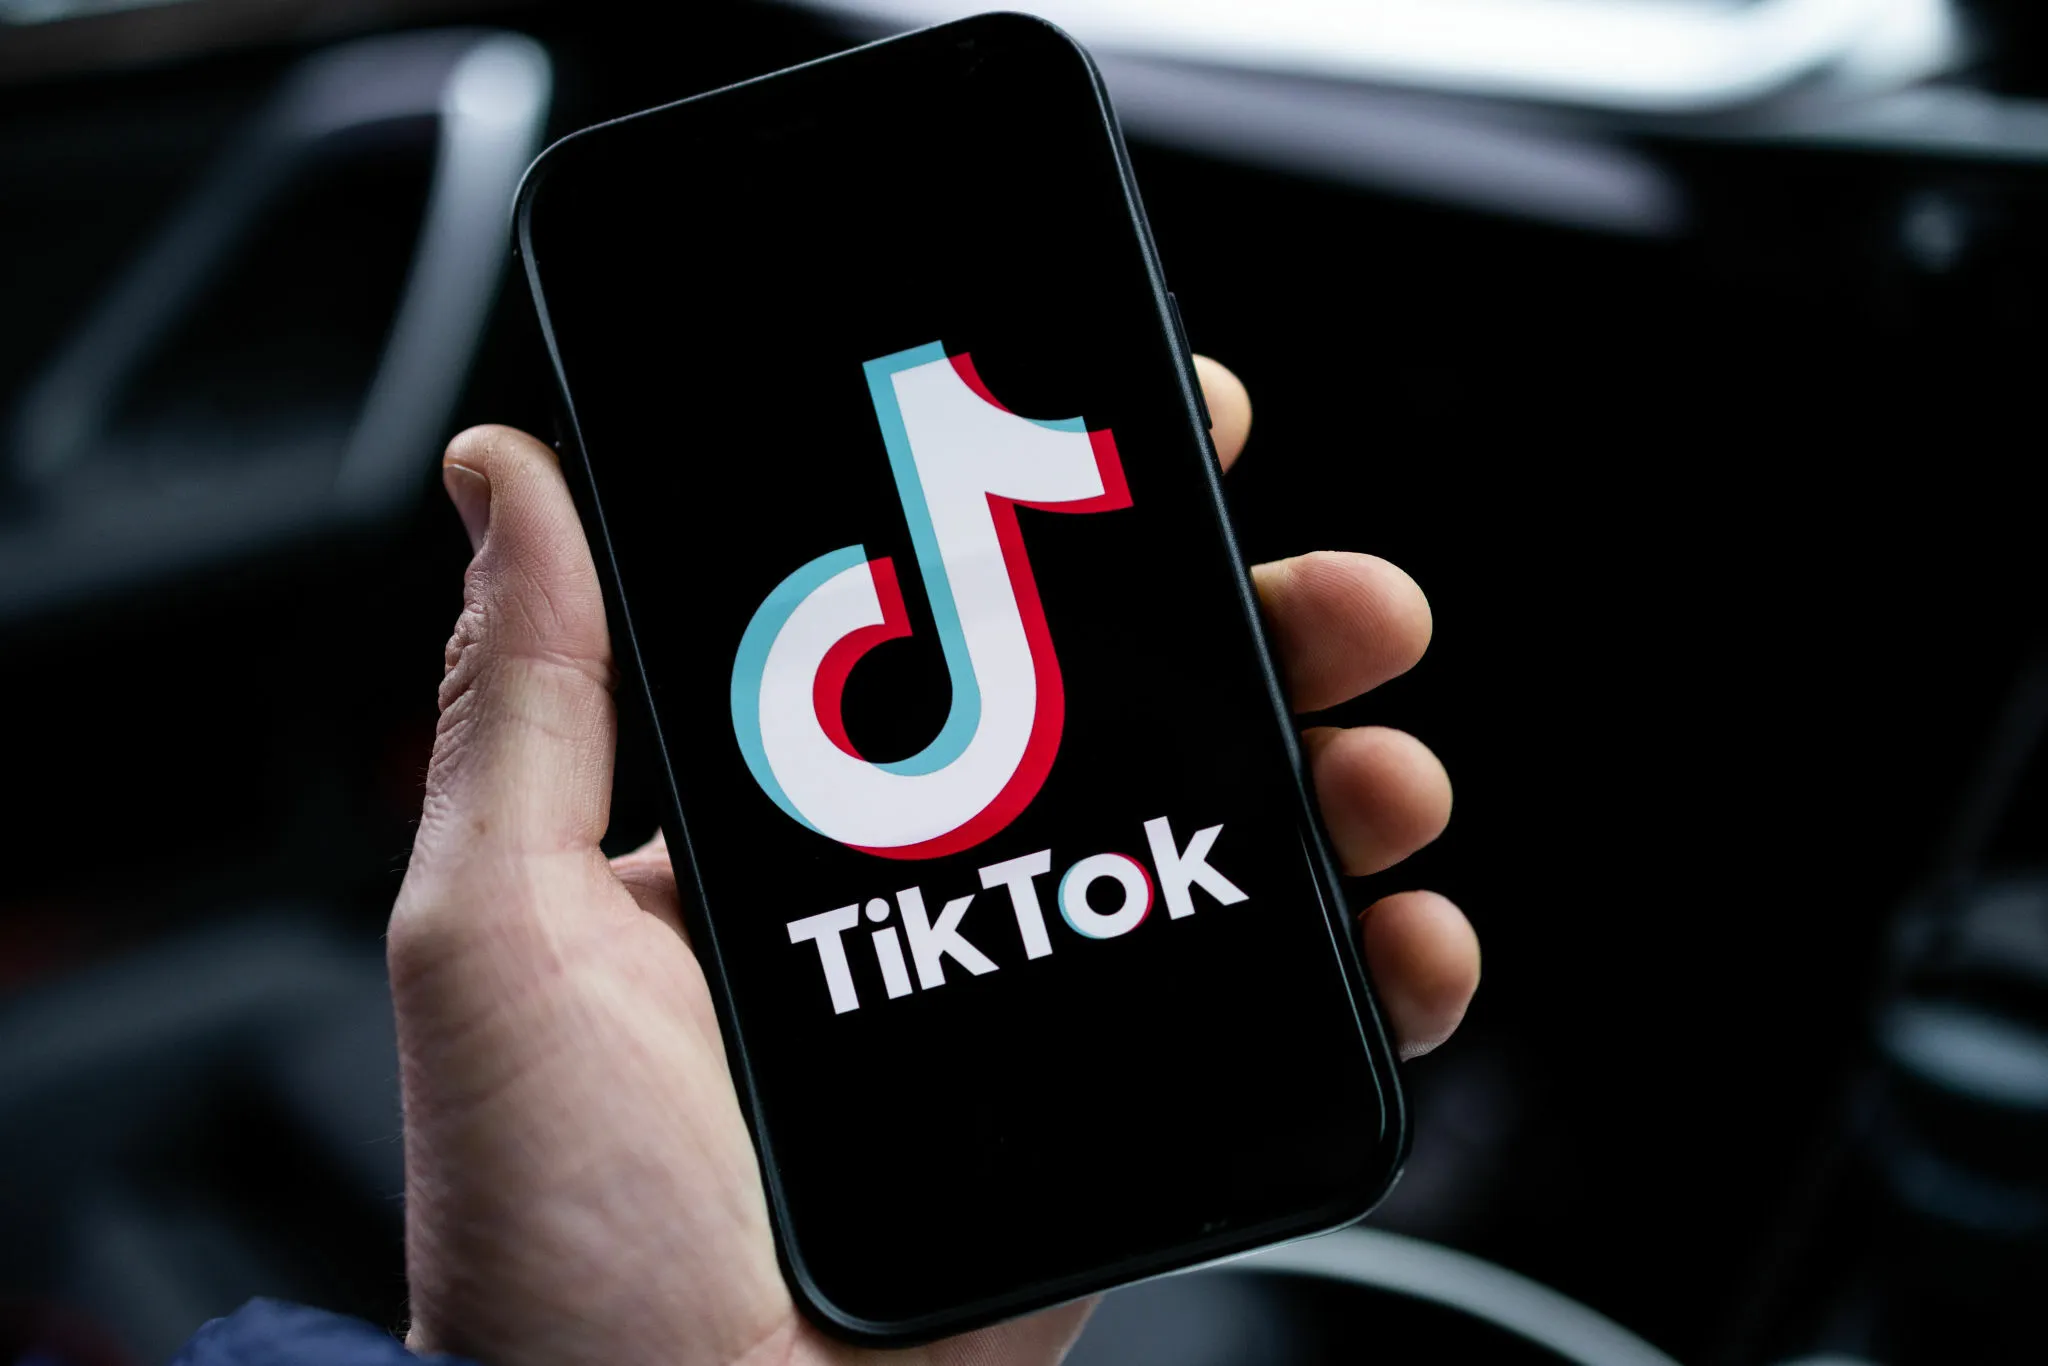 The Ultimate Guide to Editing Videos on TikTok